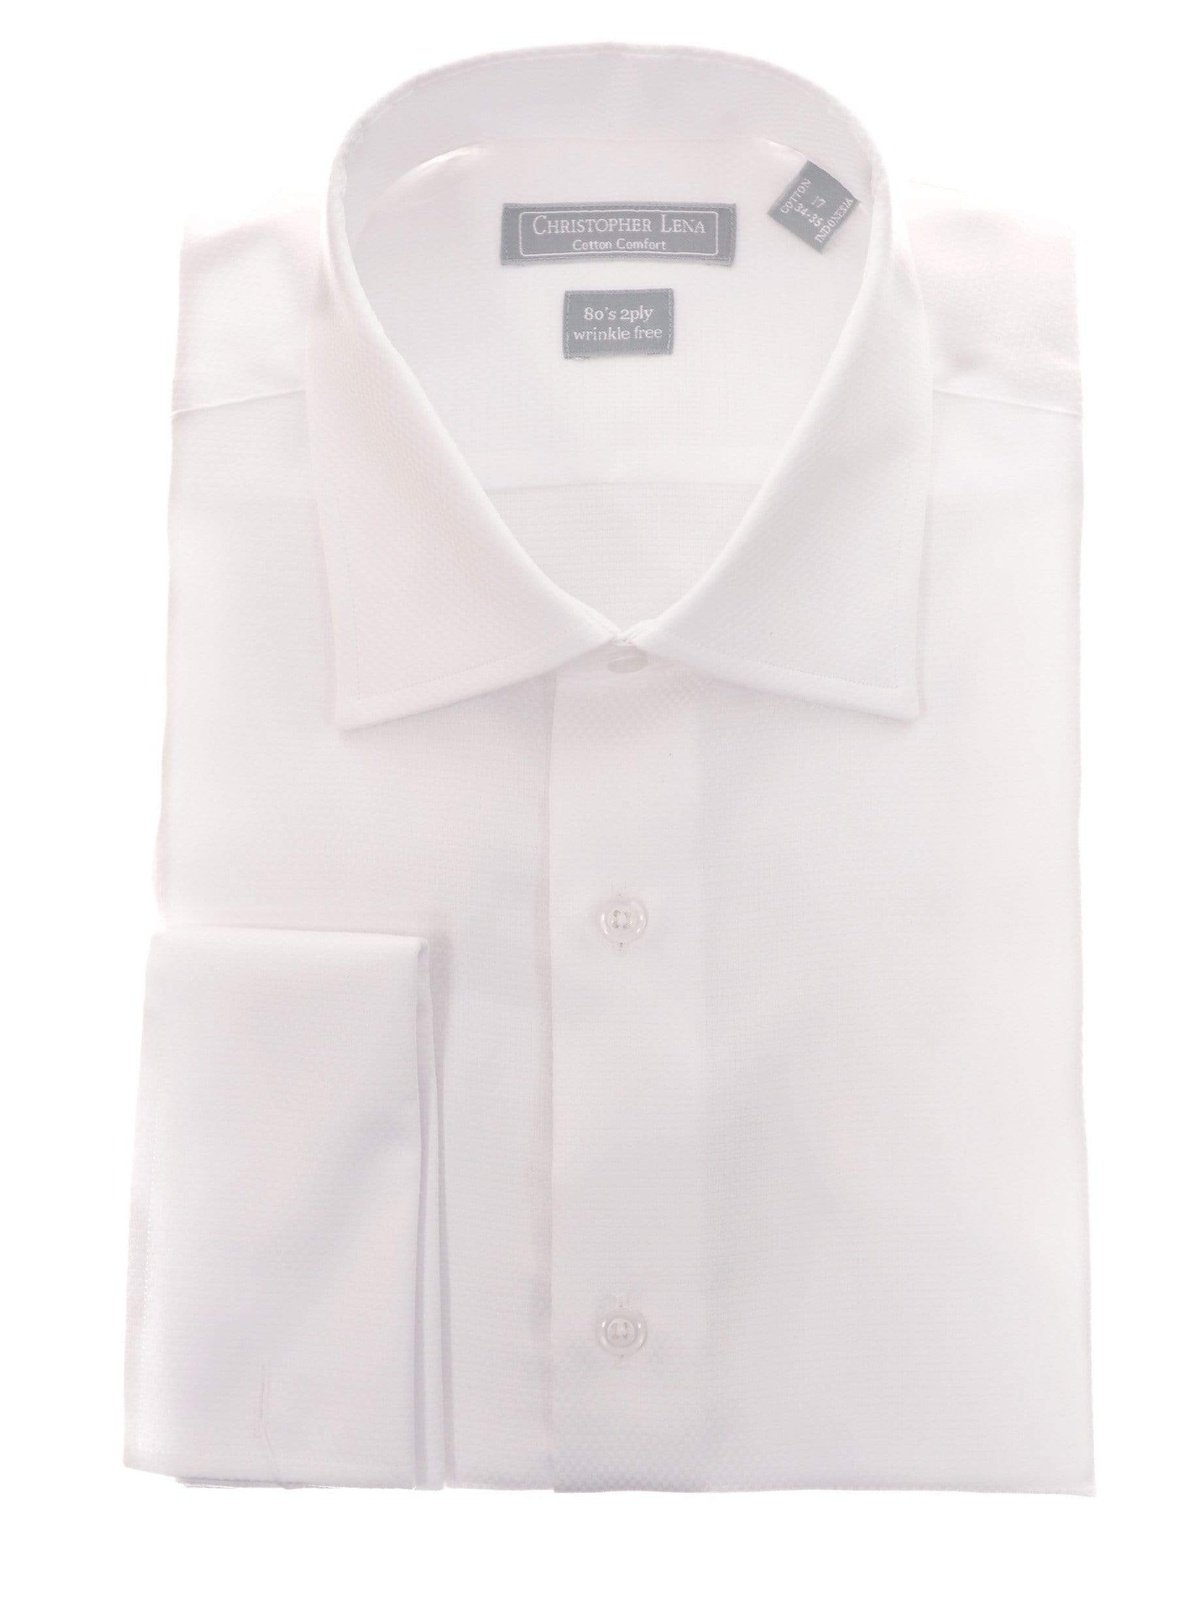 Christopher Lena Bestselling Items 16 32/33 Mens Classic Fit White Textured French Cuff Wrinkle Free Cotton Dress Shirt